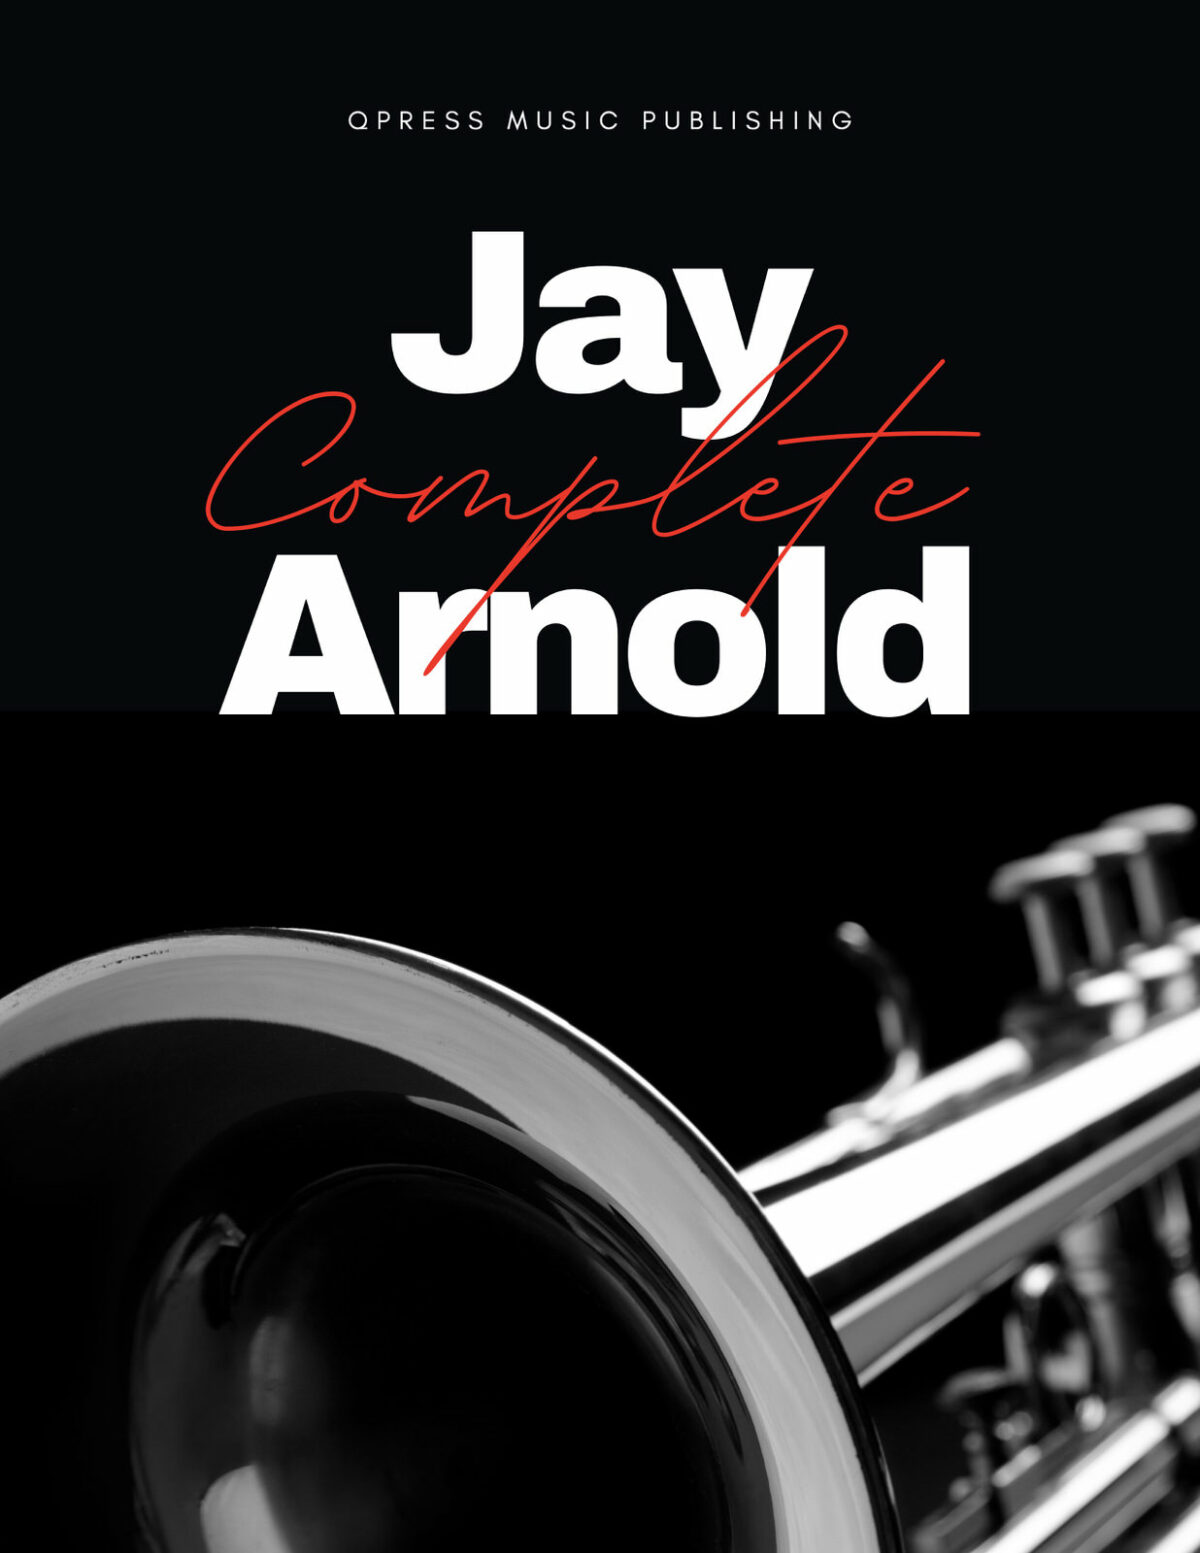 Complete Jay Arnold-p1